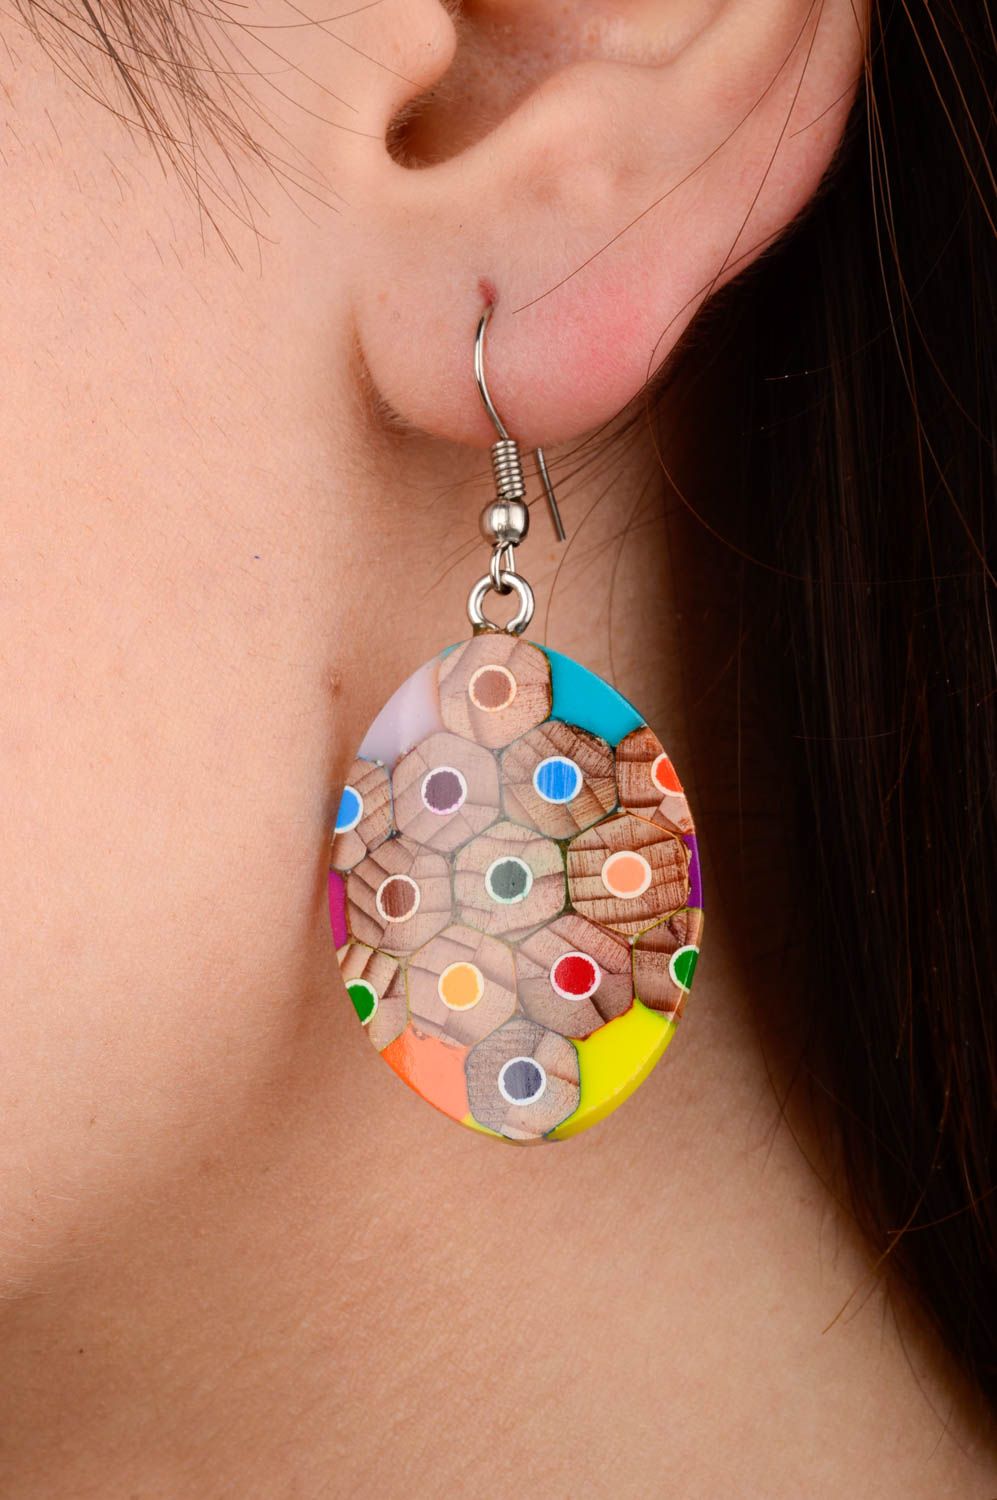 Wooden earrings handmade stylish earrings with charms fashion jewelry for women photo 2